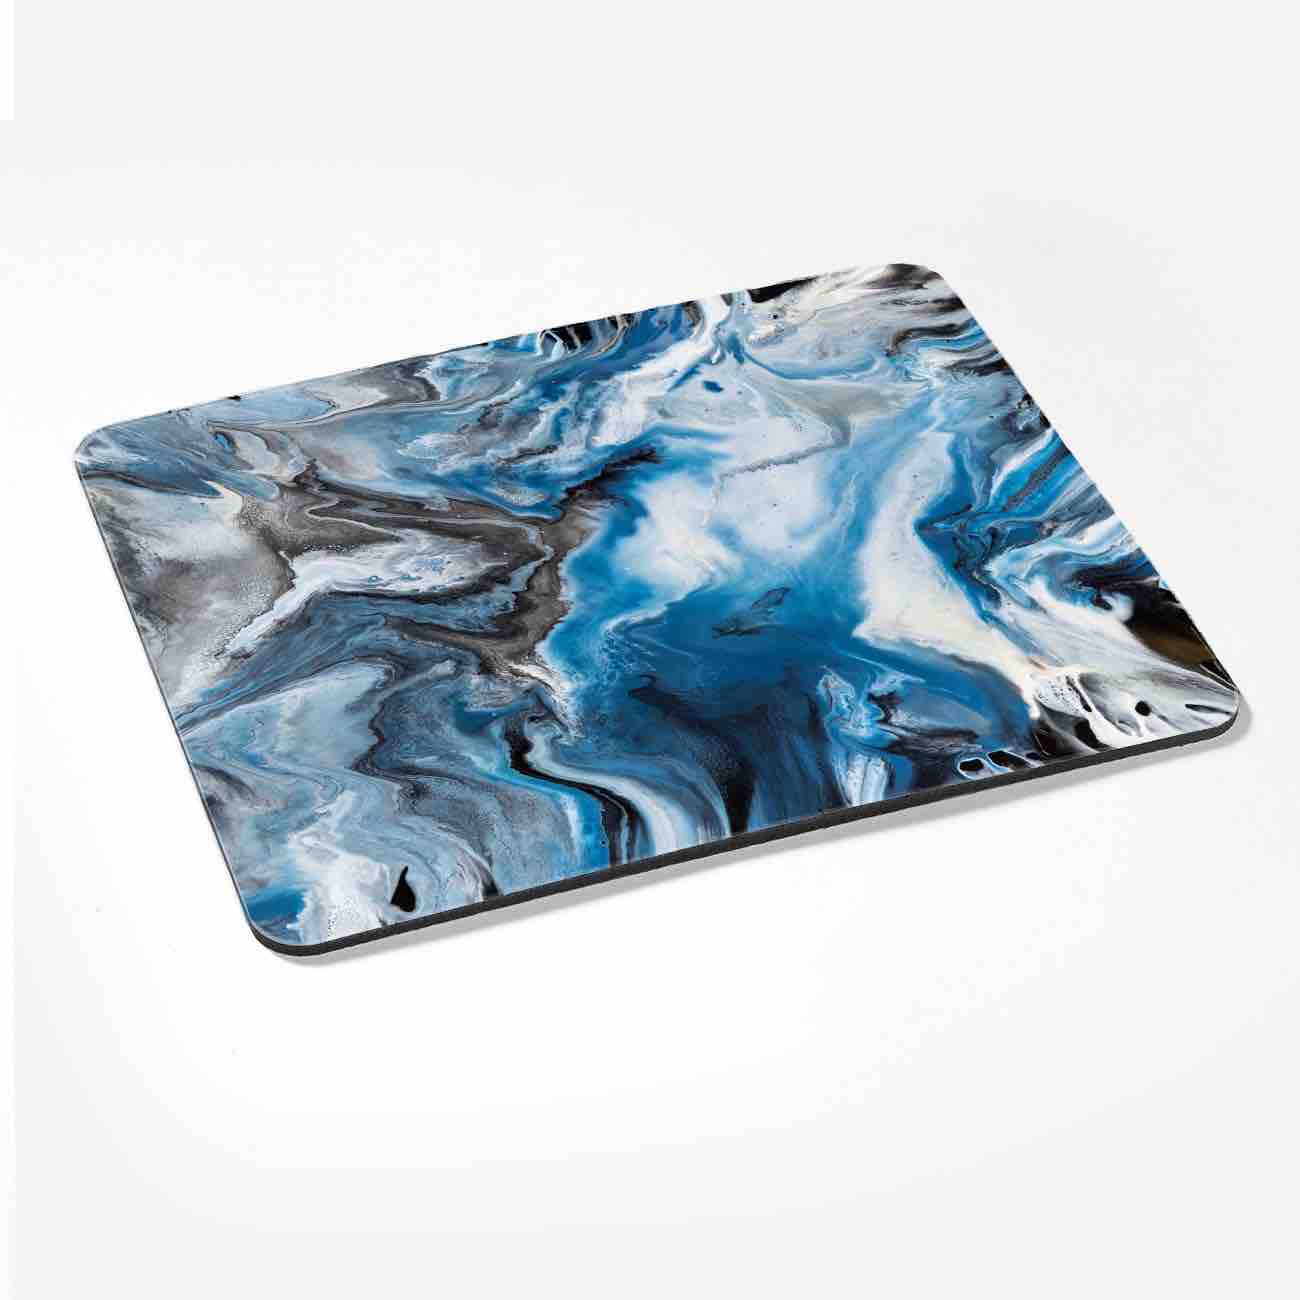 Nautical Table Placemats - Blue Dining Mats - Ocean Beach Vibe